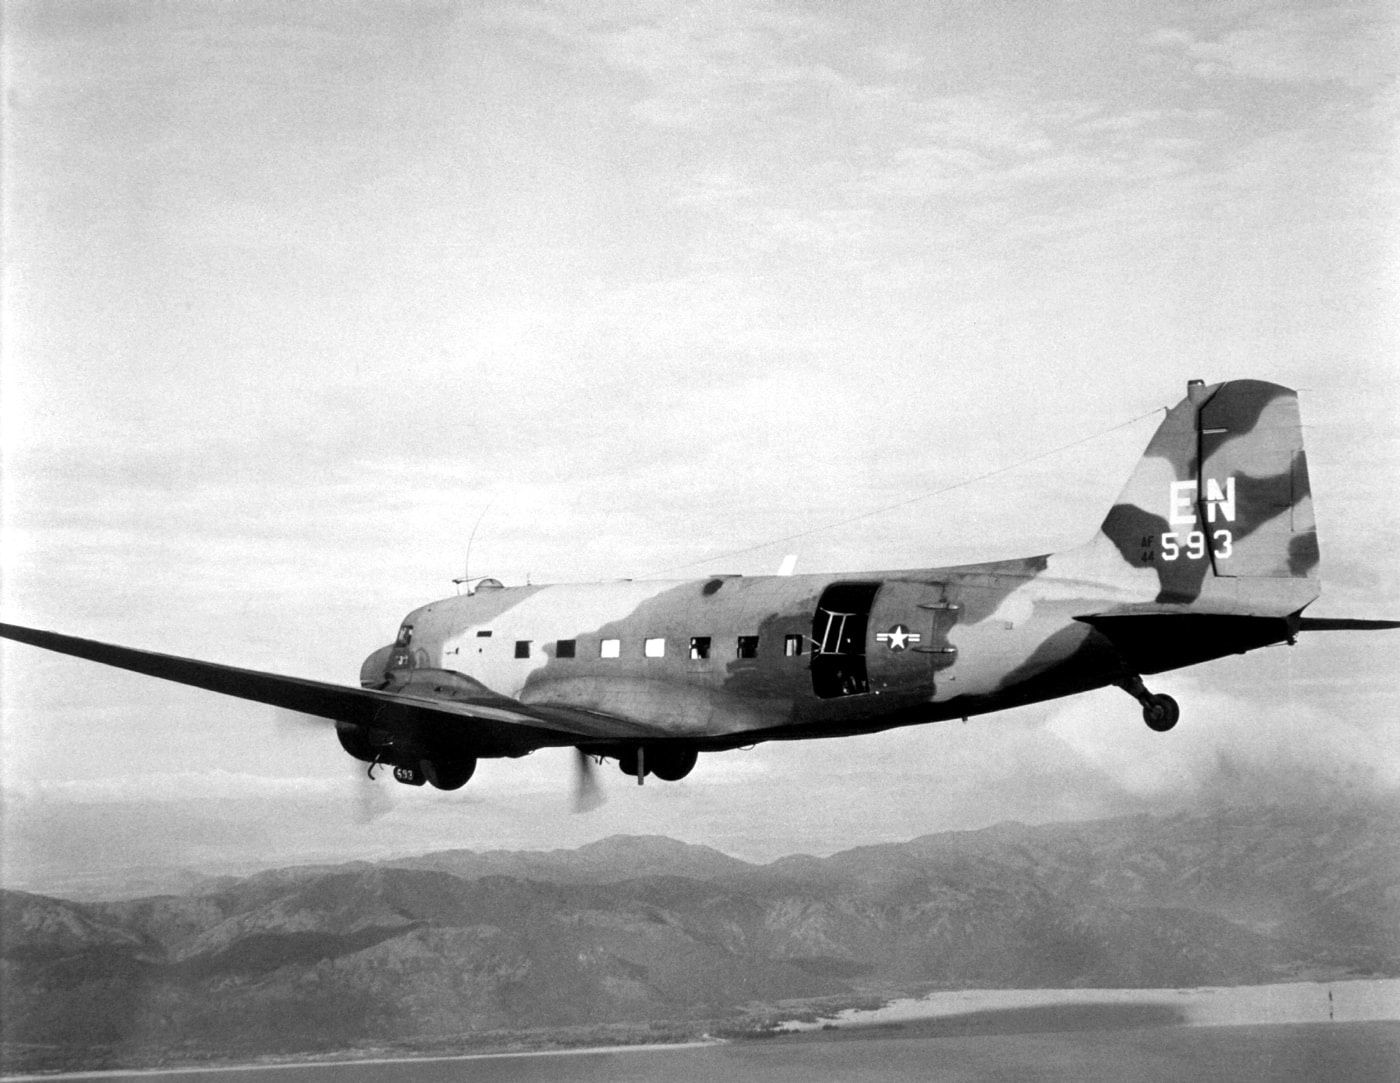 In this digital picture,  we see an AC-47 gunship flying near Saigon, South Vietnam during the Vietnam War. Also known as "Puff the Magic Dragon," these aircraft typically had three 7.62 mm miniguns mounted on the left side of the aircraft. The aircraft carried up to 8 crew members including the pilot and was the start of a robust gunship program in the United States military. A gunship is a military aircraft armed with heavy aircraft guns, primarily intended for attacking ground targets either as airstrike or as close air support.